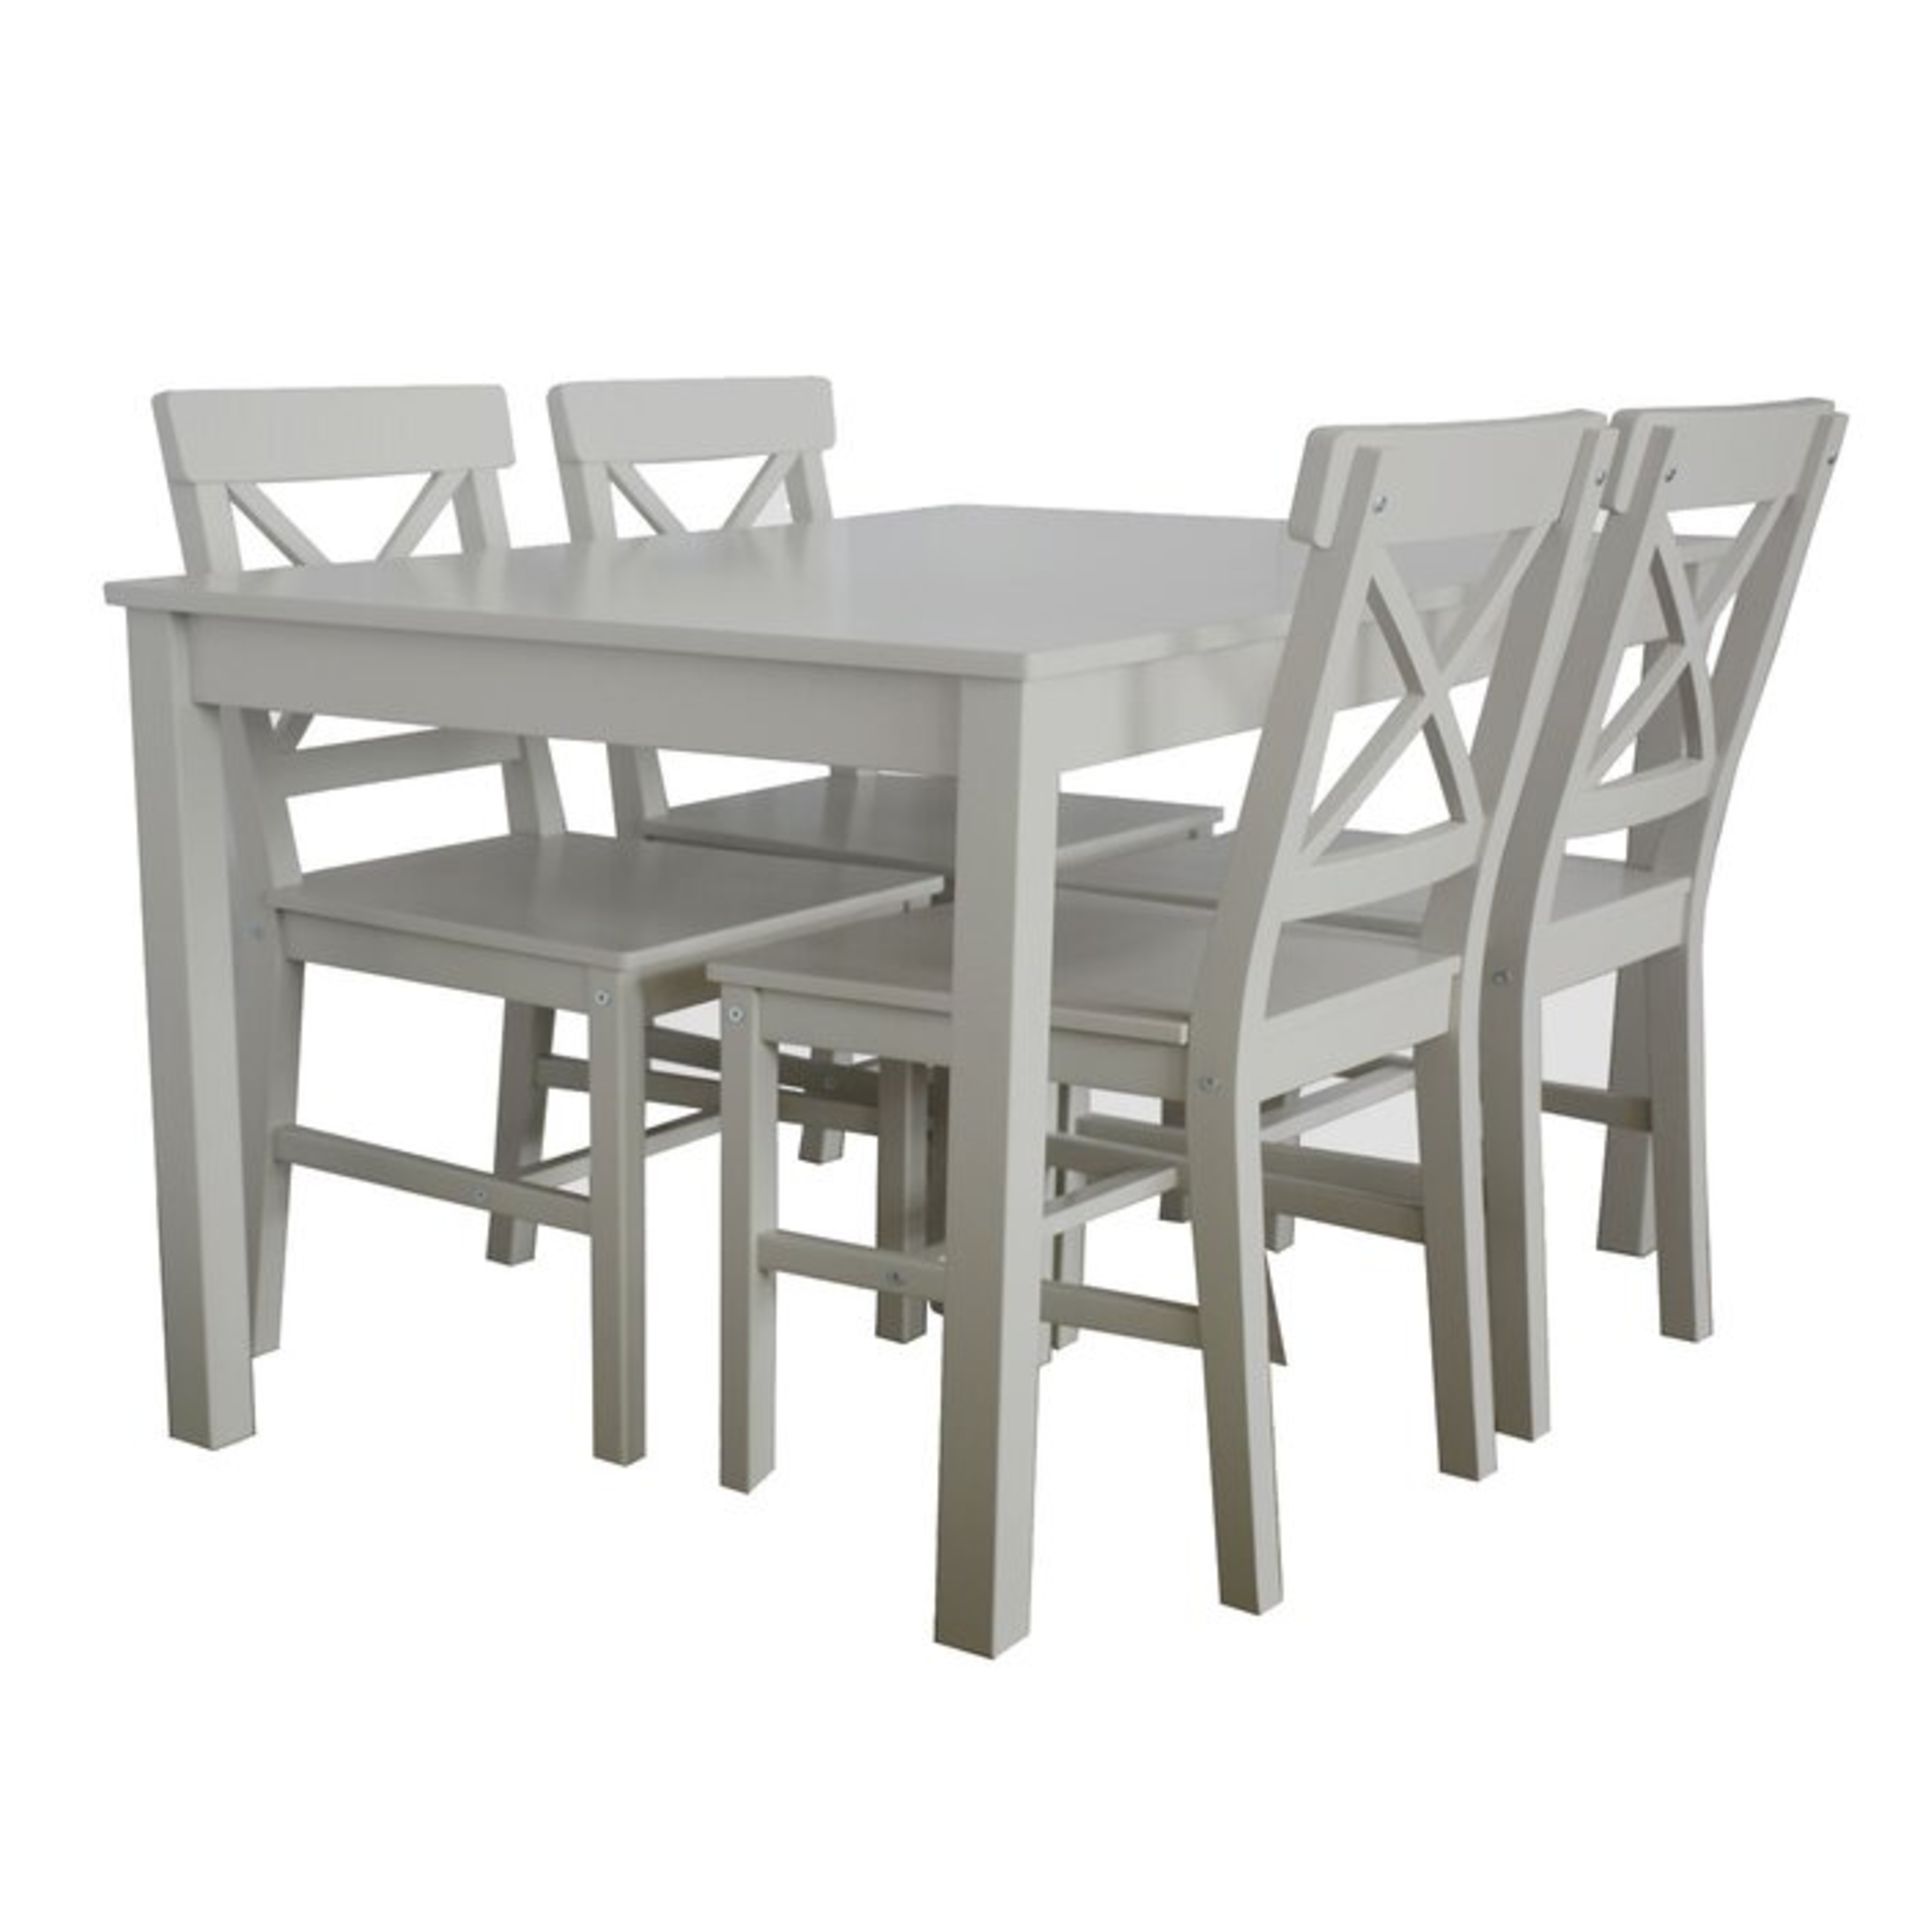 Lars Dining Set with 4 Chairs - RRP £309.99 - Image 3 of 3